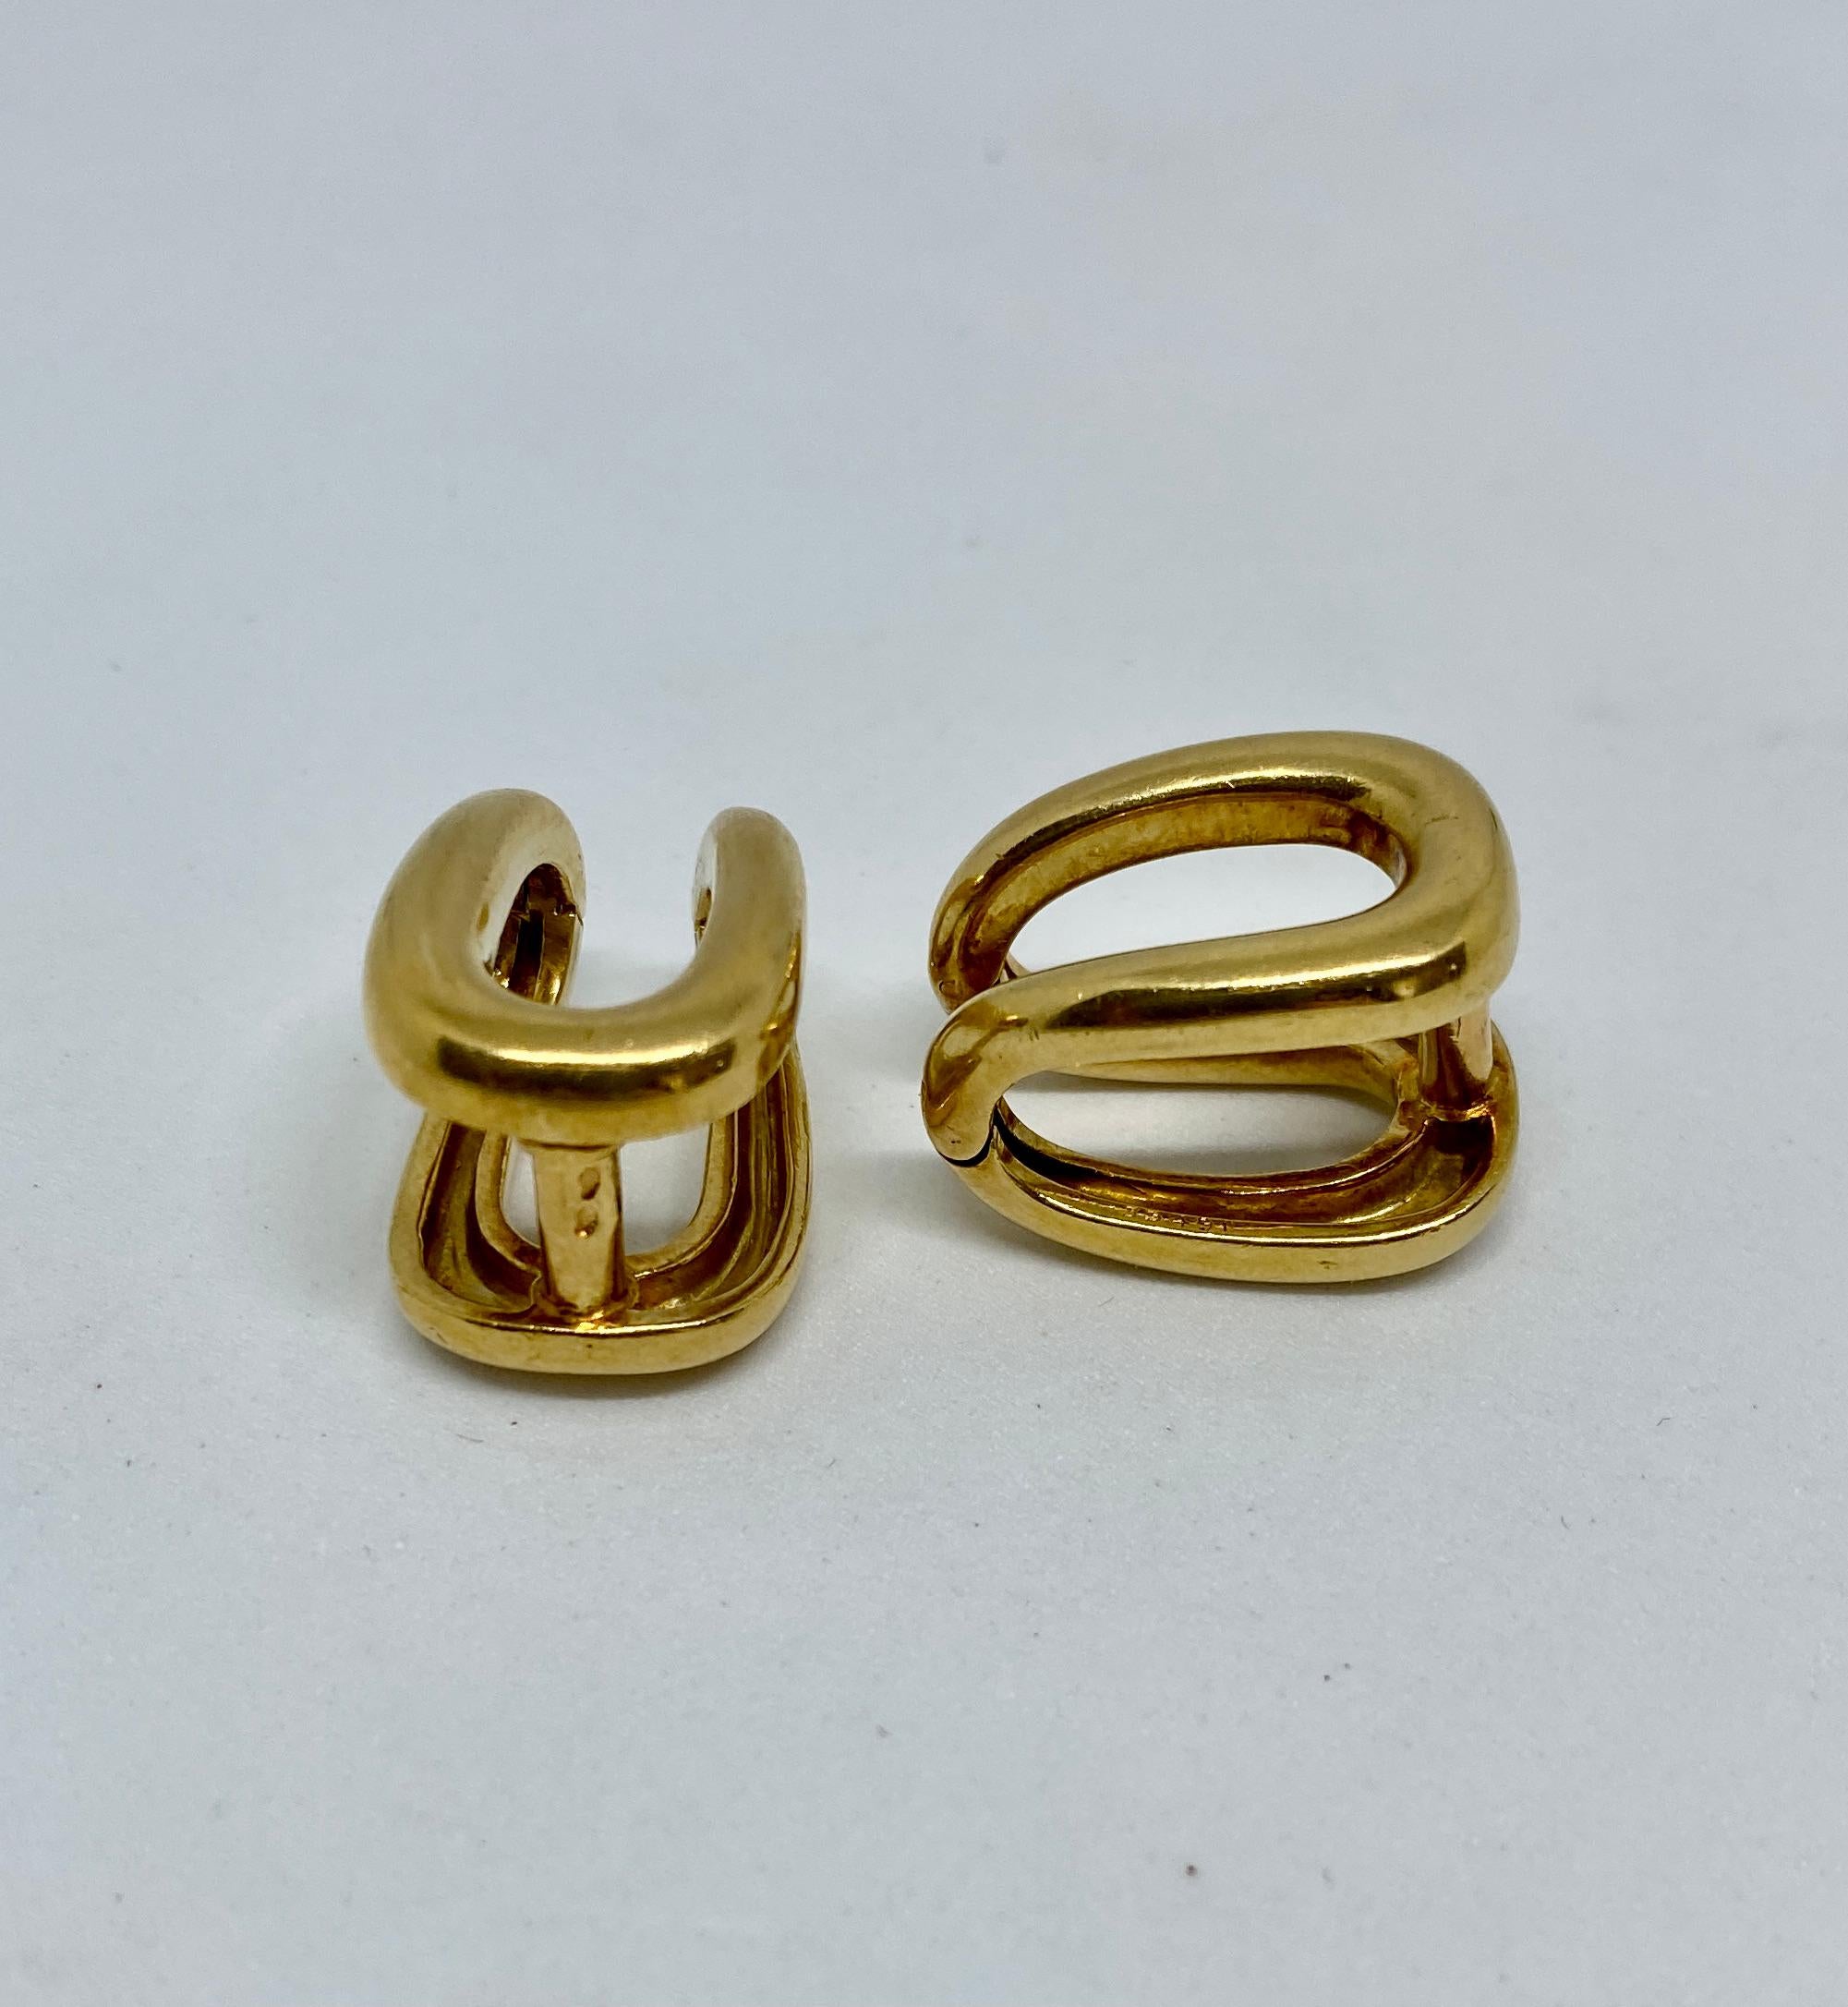 Classic, extremely well made wraparound-style cufflinks in 18K yellow gold by Boucheron.

The design of these cufflinks make them very easy to place through the buttonholes. The faces measure 21.6mm by 14.2mm by 14.6mm. Together the cufflinks weigh